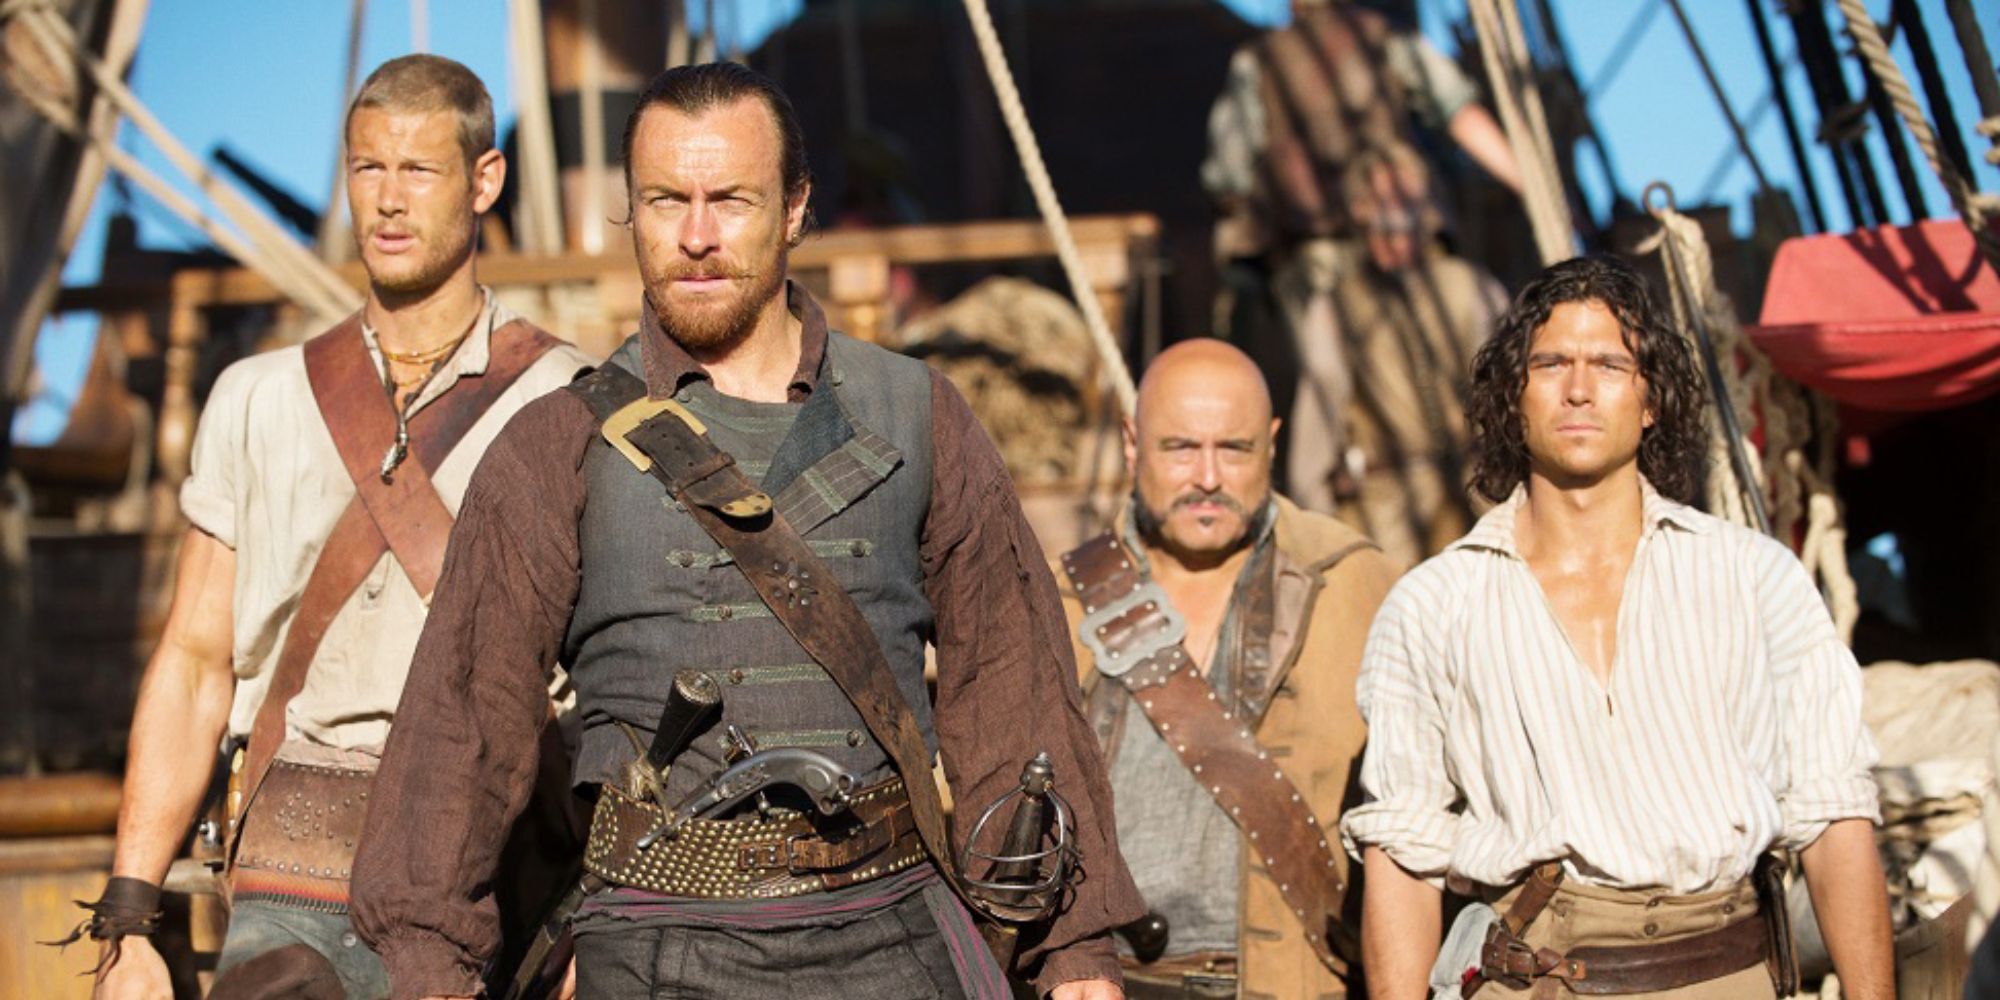 Captain Flint and John Silver standing on a ship's deck in Black Sails.